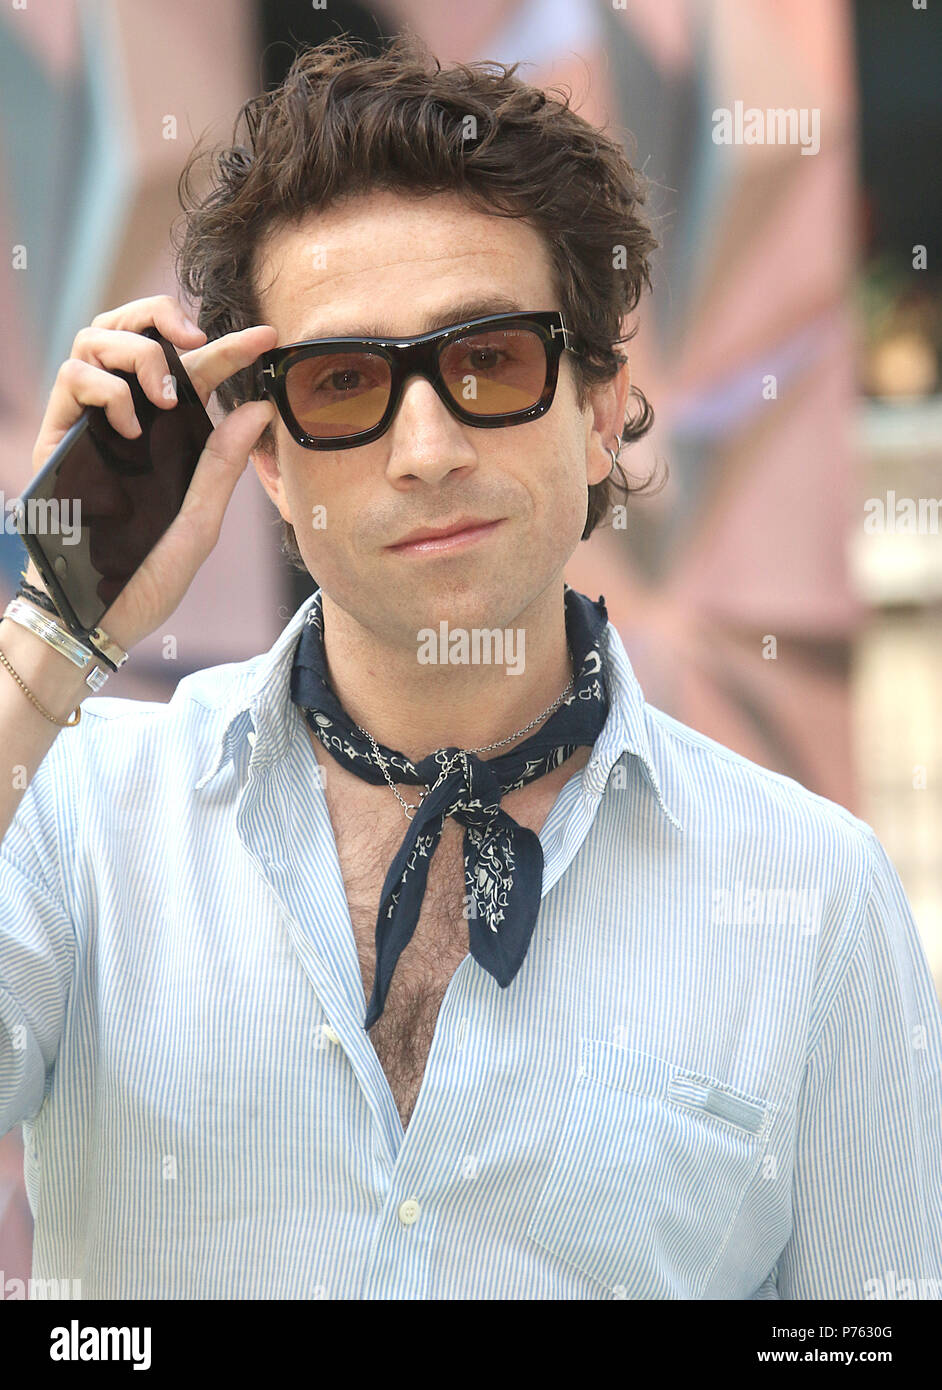 Jun 06, 2018 - Nick Grimshaw attending Royal Academy Of Arts 250th Summer Exhibition Preview Party at Burlington House in London, England, UK Stock Photo